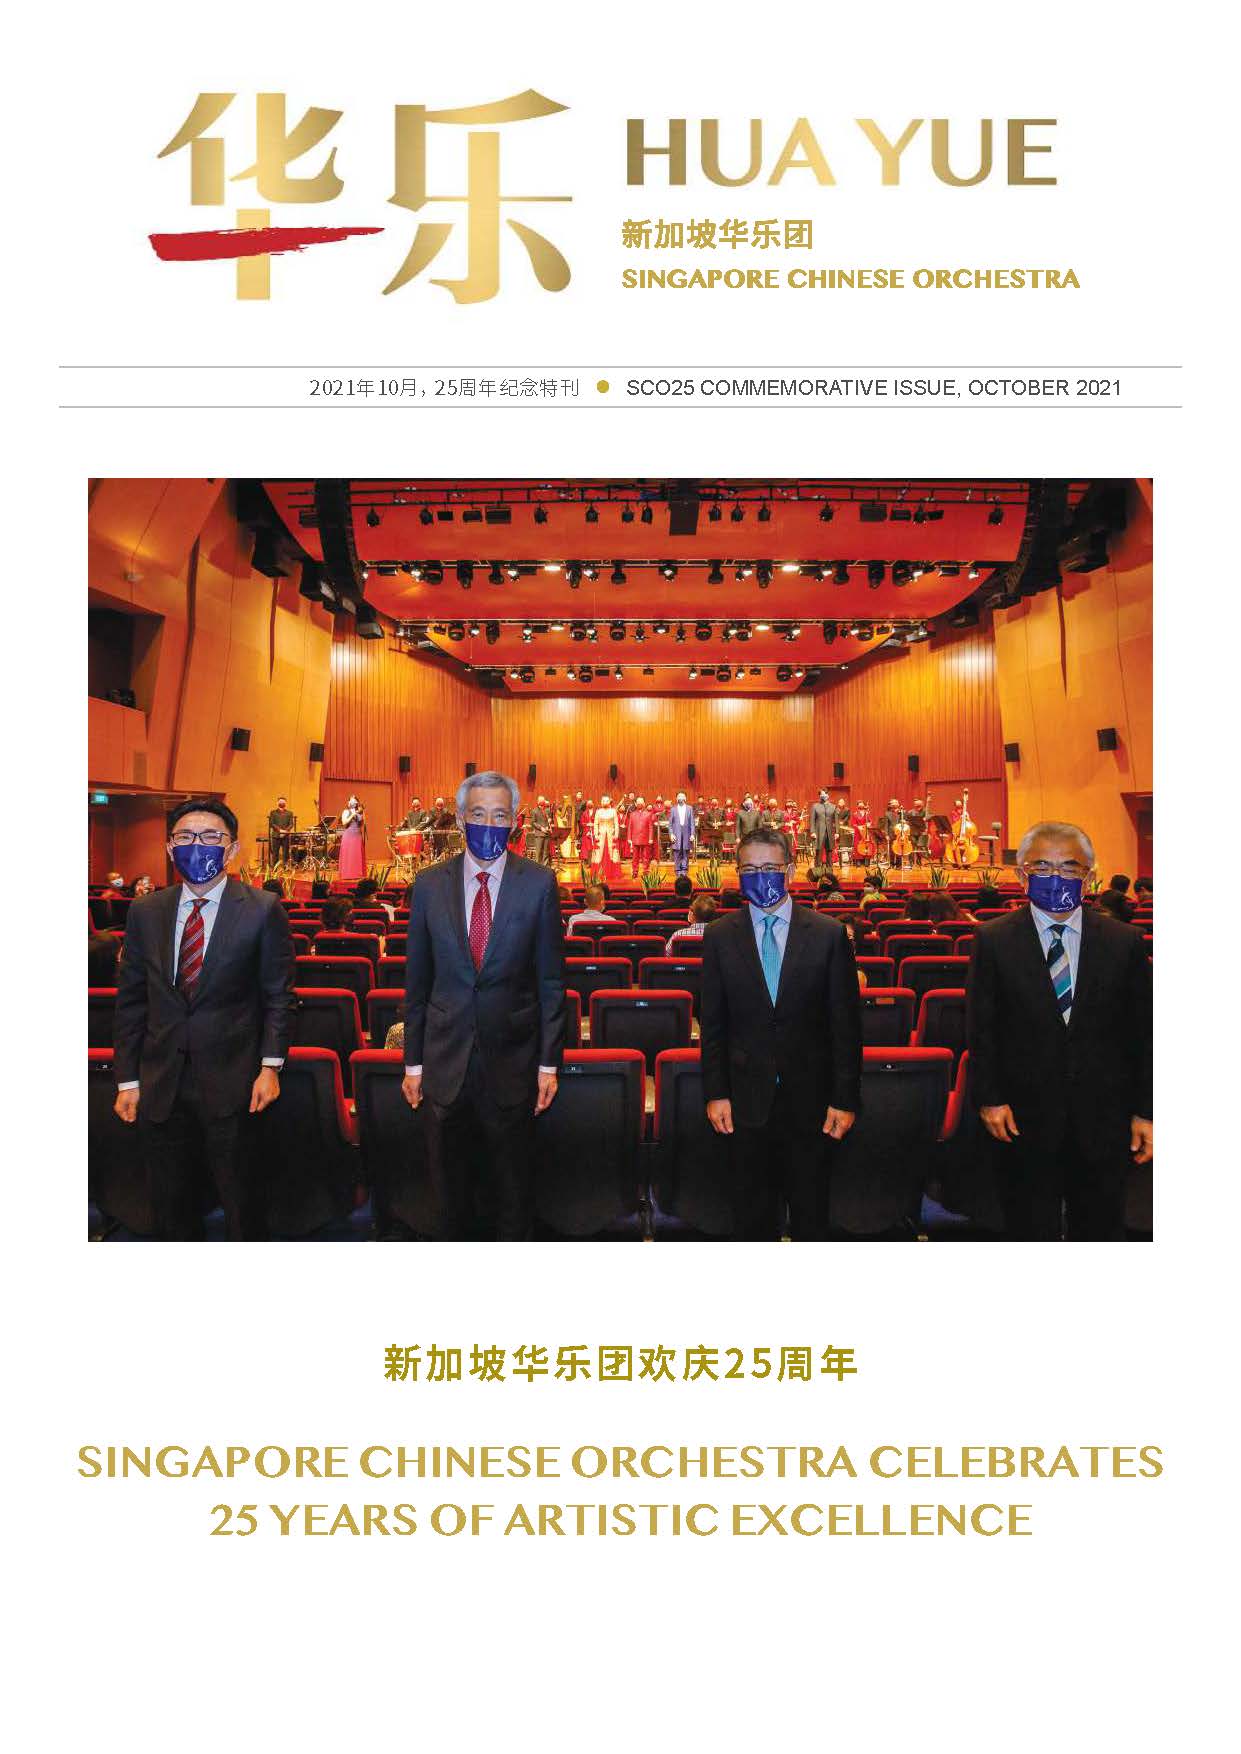 SINGAPORE CHINESE ORCHESTRA CELEBRATES 25 YEARS OF ARTISTIC EXCELLENCE